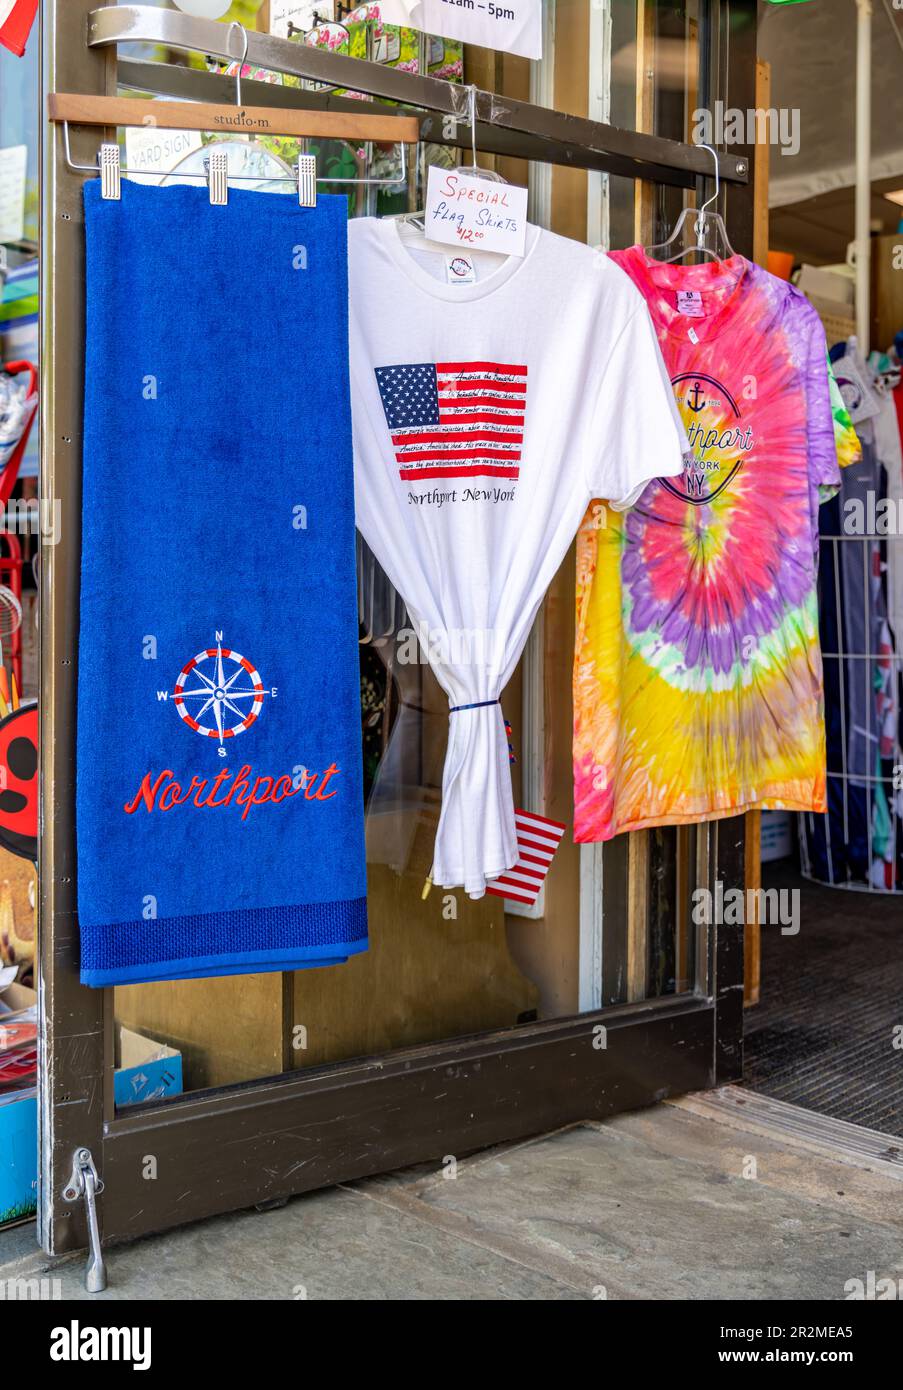 An image of t-shirts and a beach towel on display in a northport store on main street Stock Photo